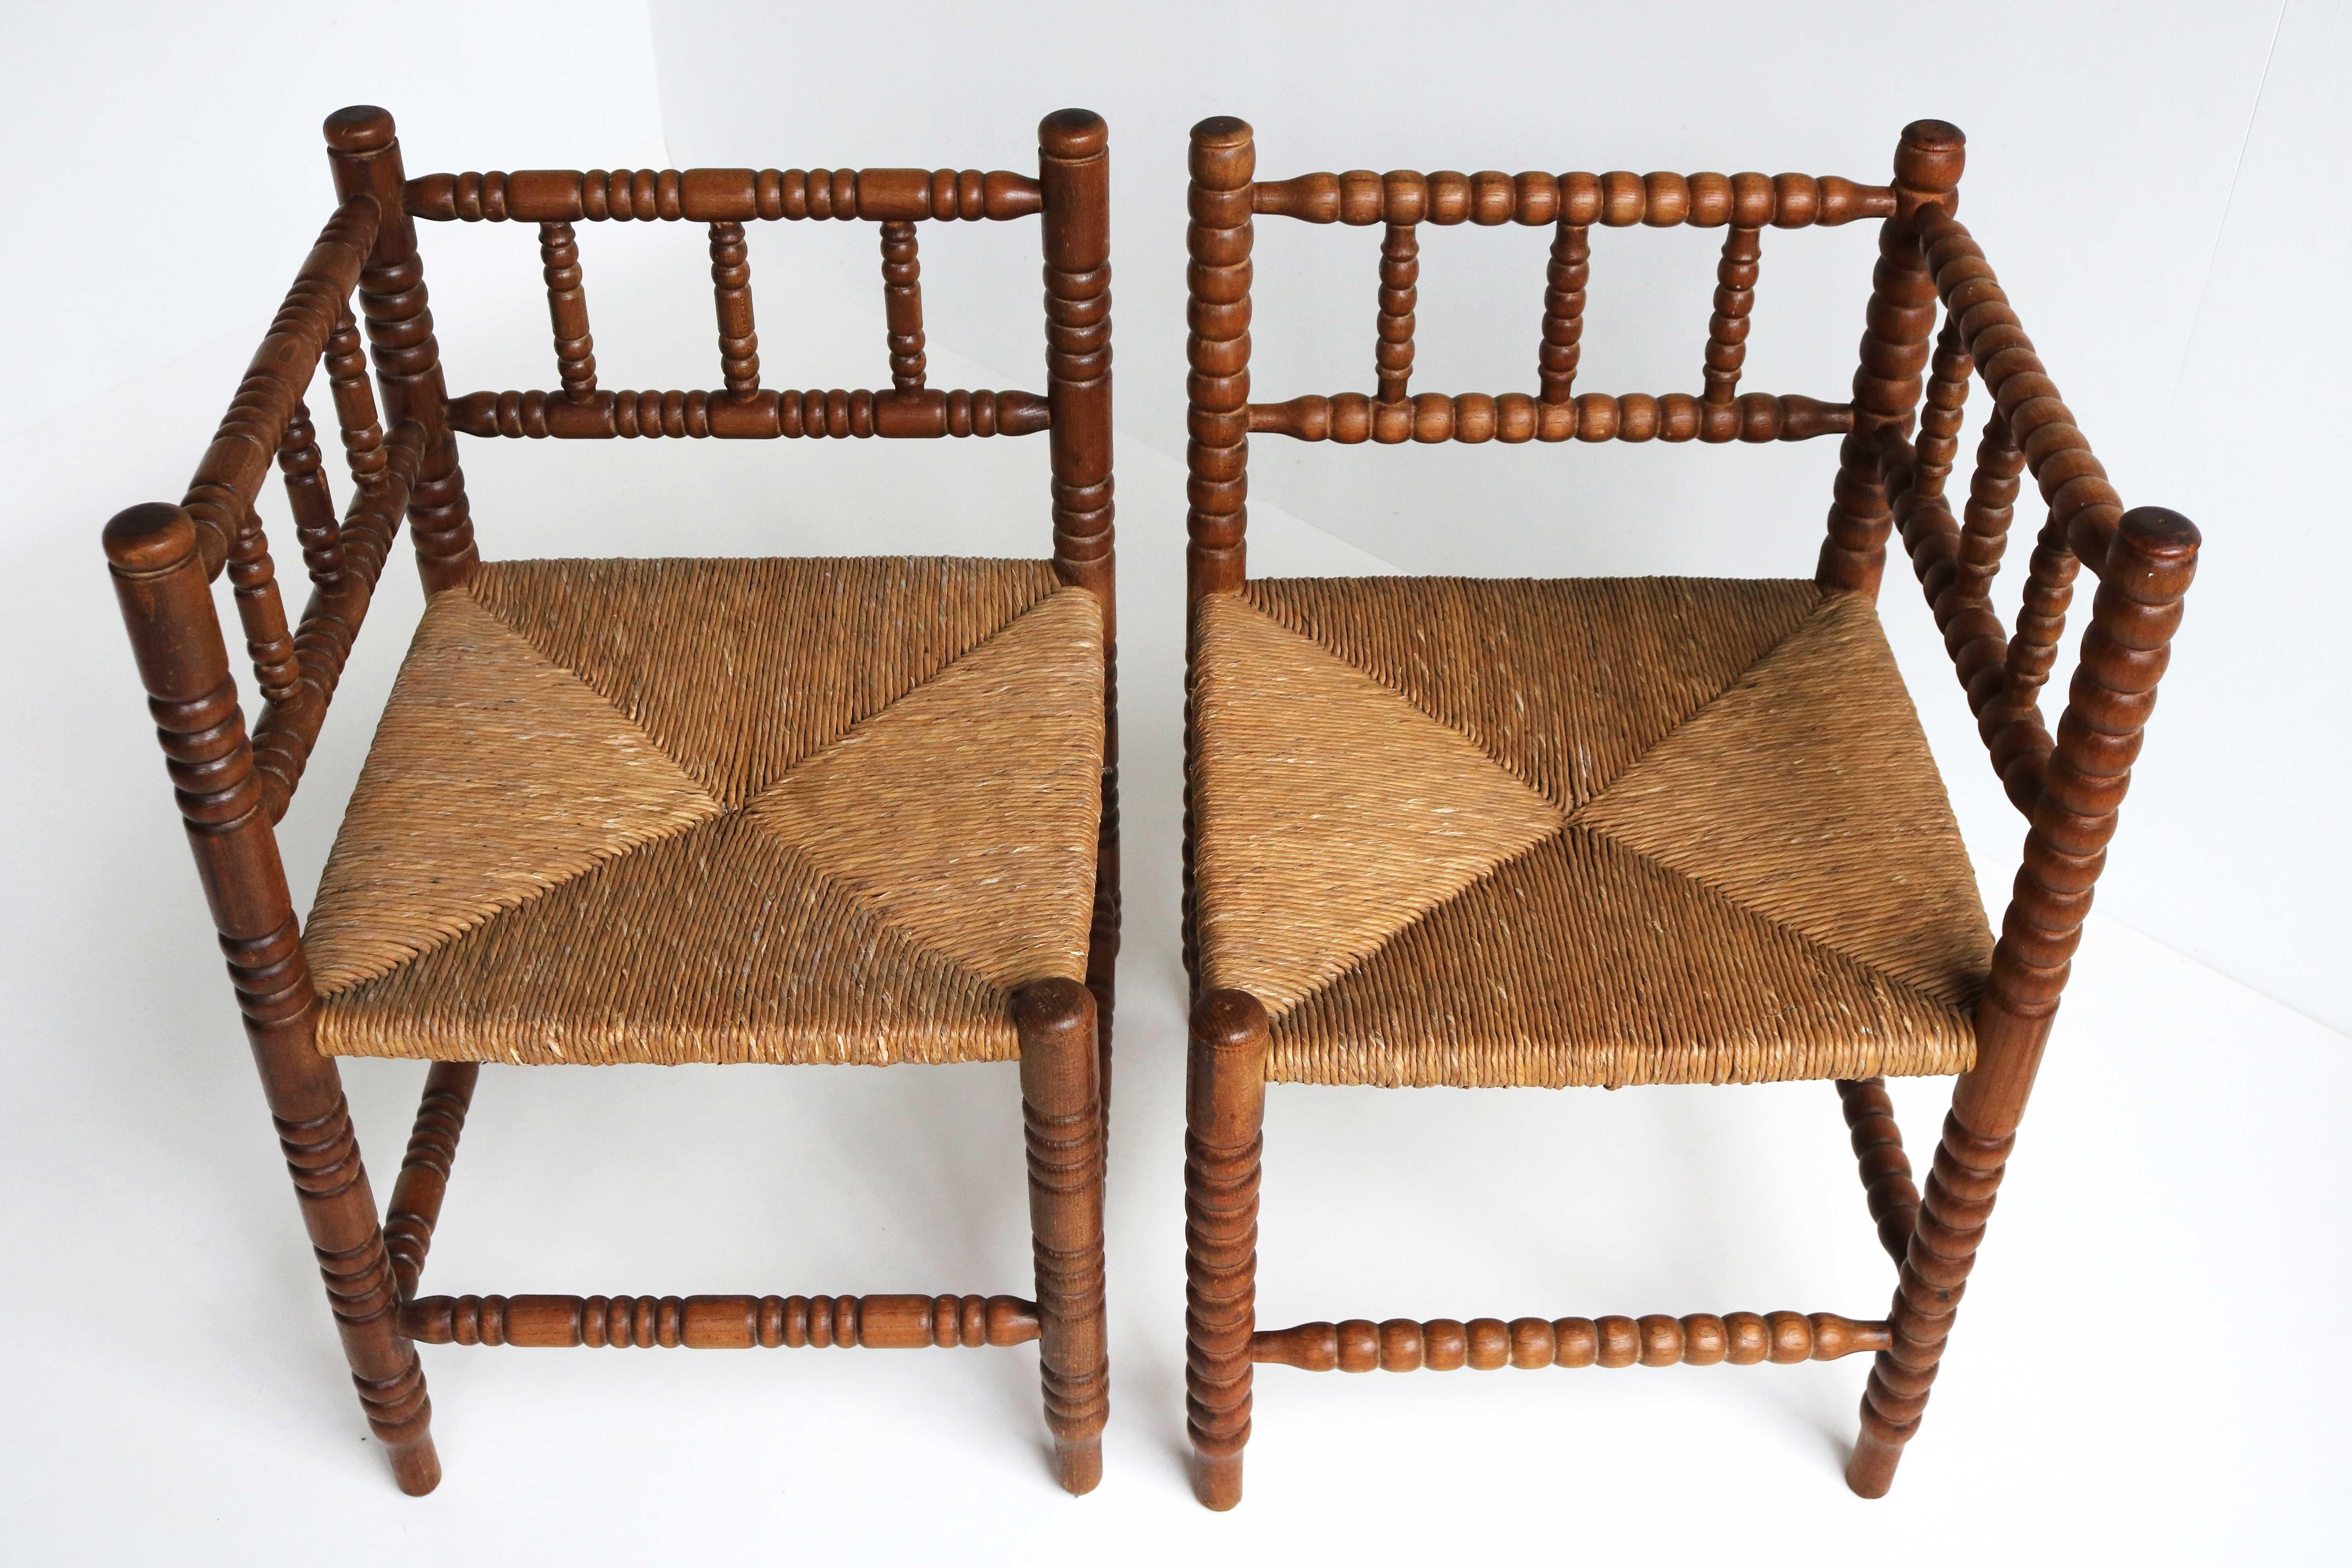 Pair antique rush-seat corner bobbin side knitting chairs in turned wood and cane, Dutch ca 1900, Country Living, farmhouse decor.

Lovely couple typical Dutch knitting chairs, with minimal differences.
This antique 'corner chair' with wicker